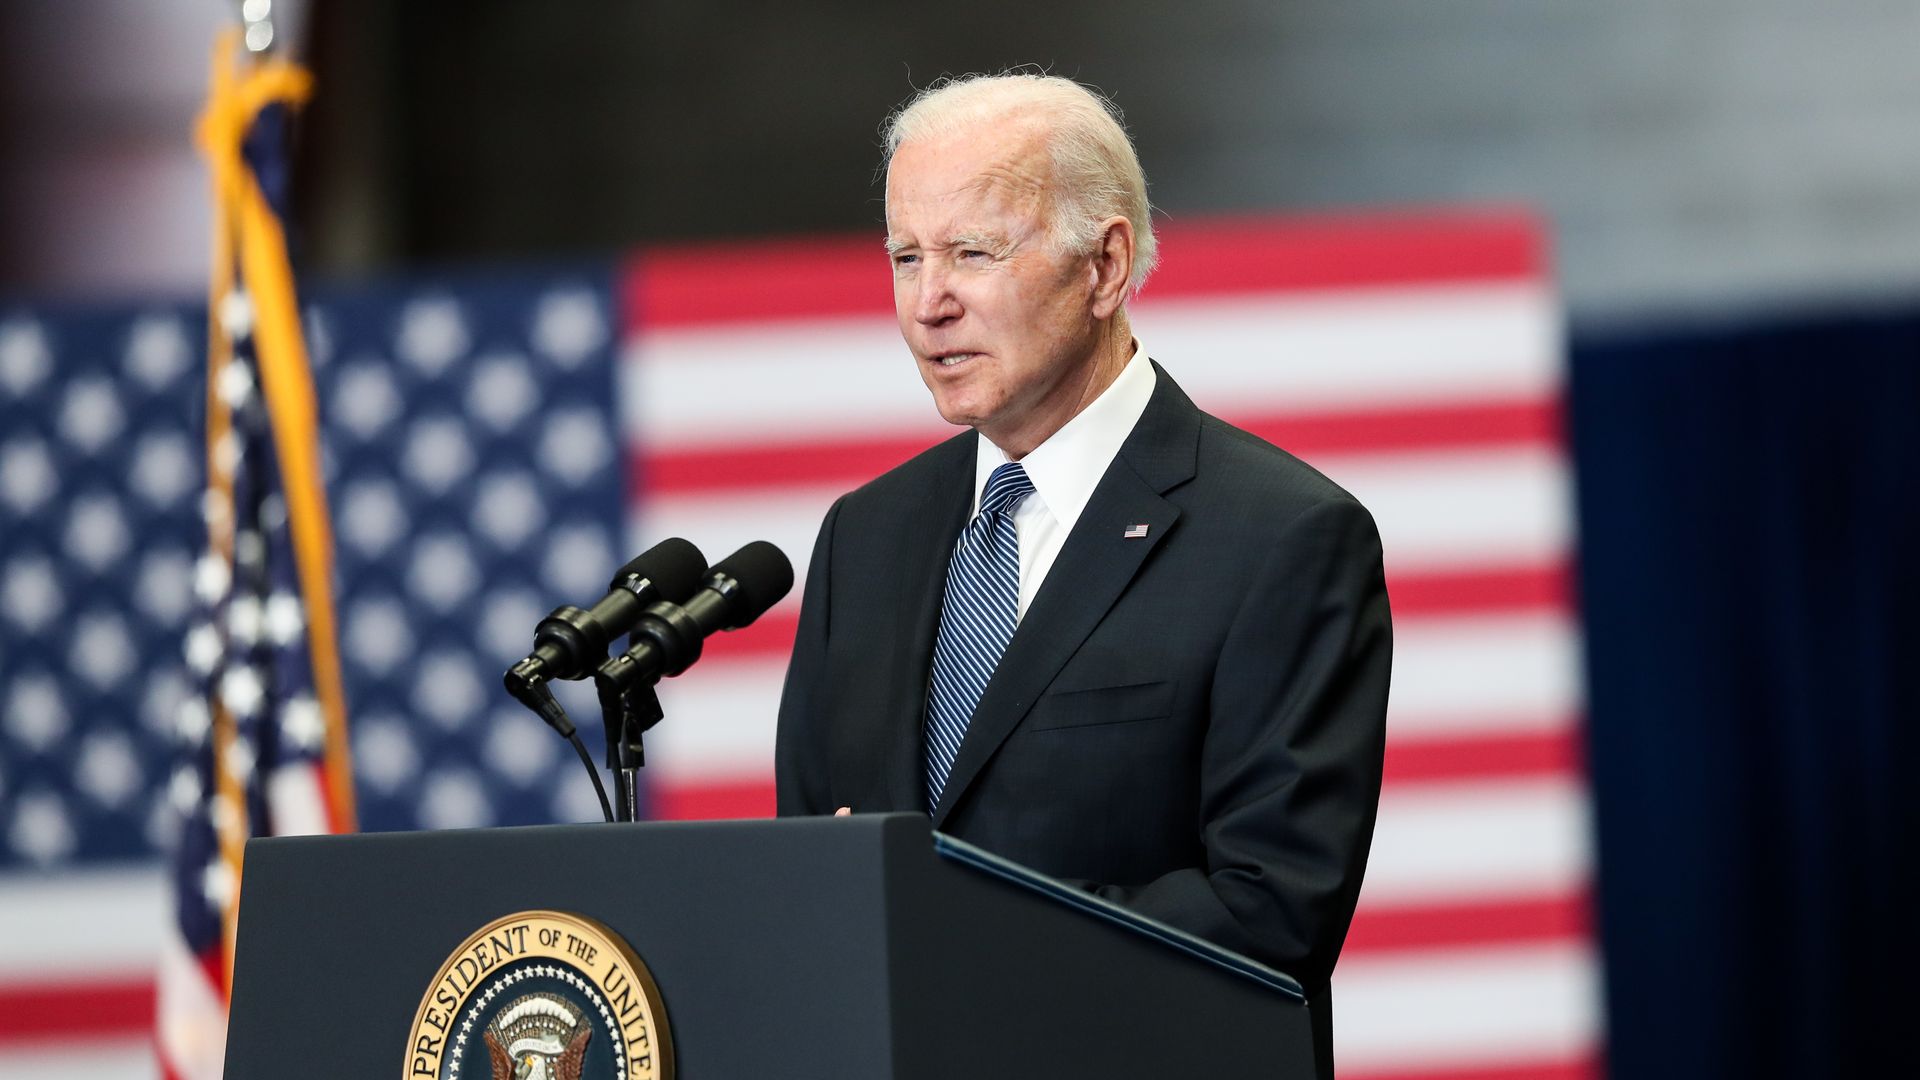 Photo of Joe Biden speaking from a podium with a giant American flag hanging behind him